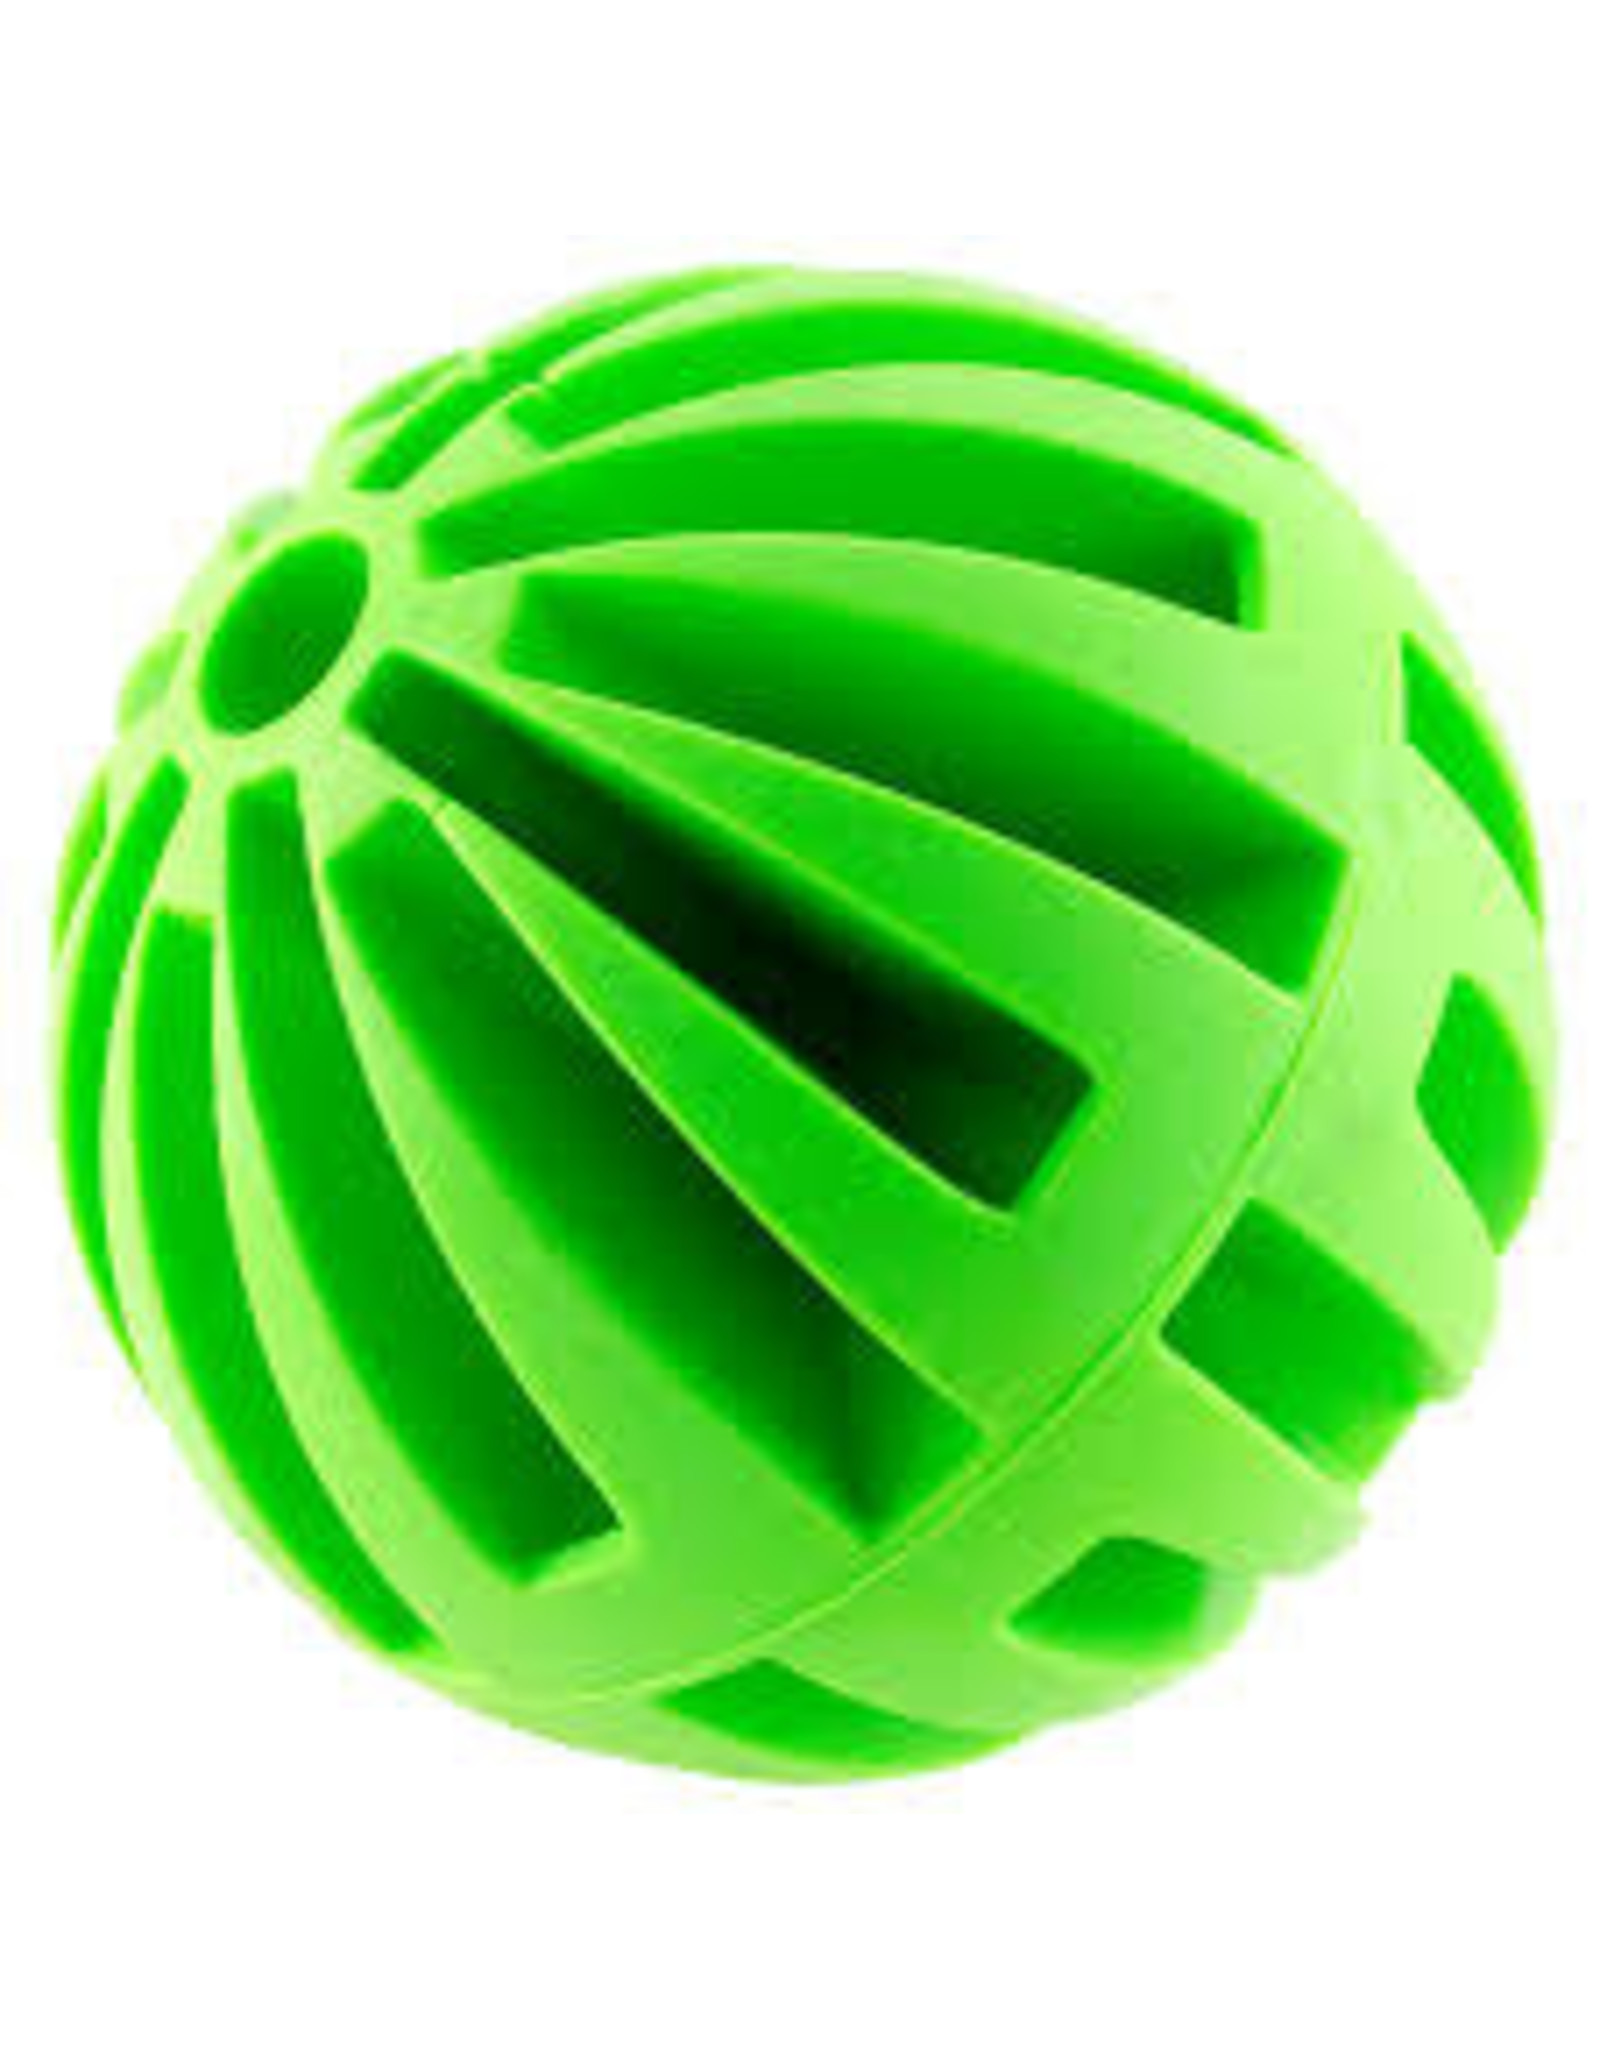 CHAMPION CHAMP DURASEAL CRAZY BOUNCE BALL TARGET